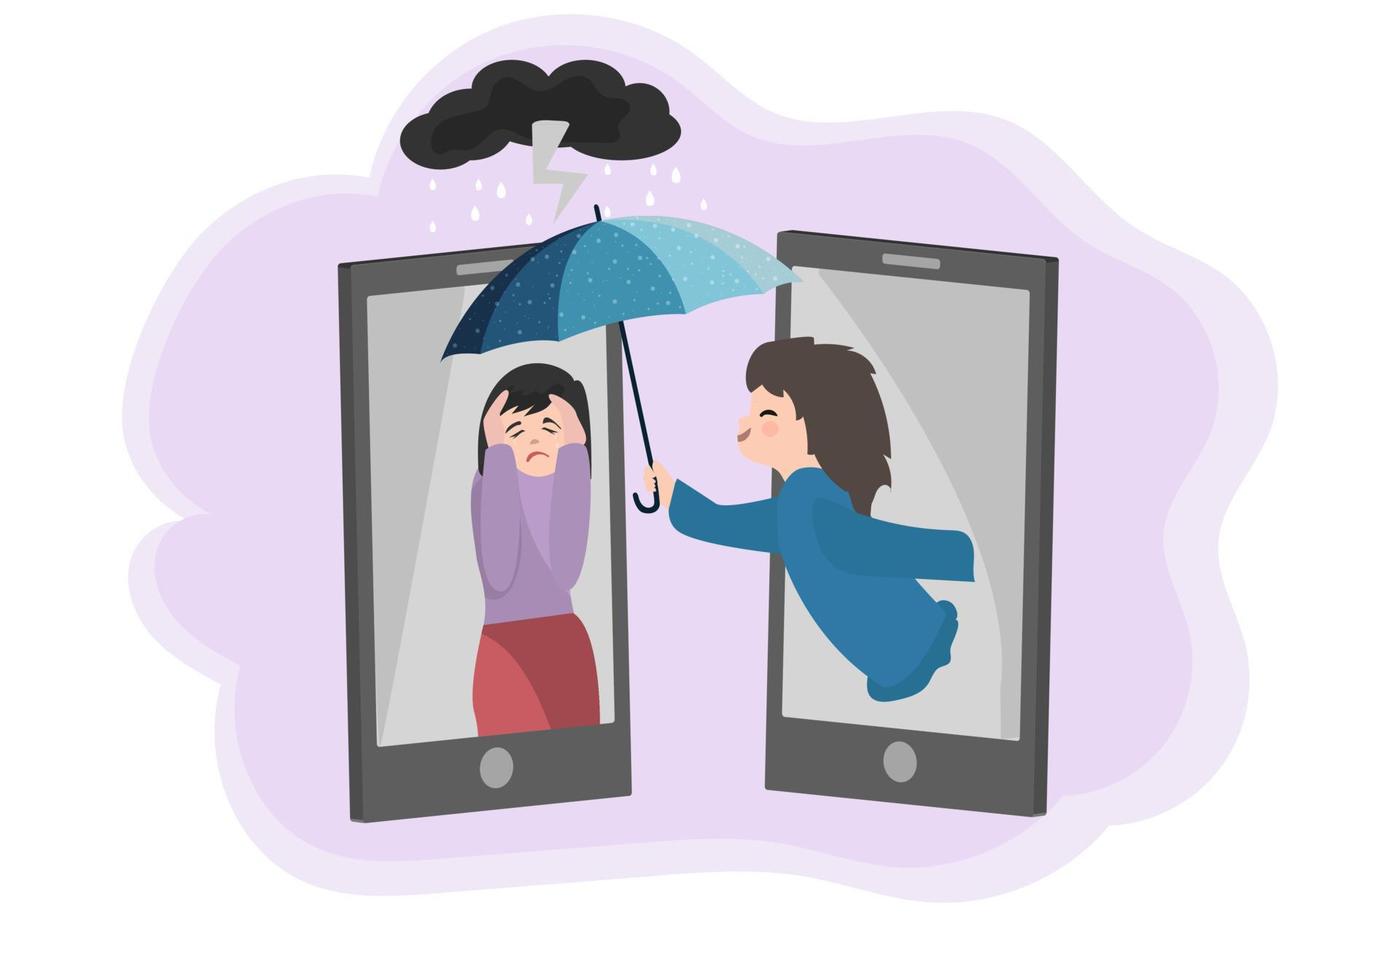 The young woman, she was sad, her friend consoled her. Via smartphone vector